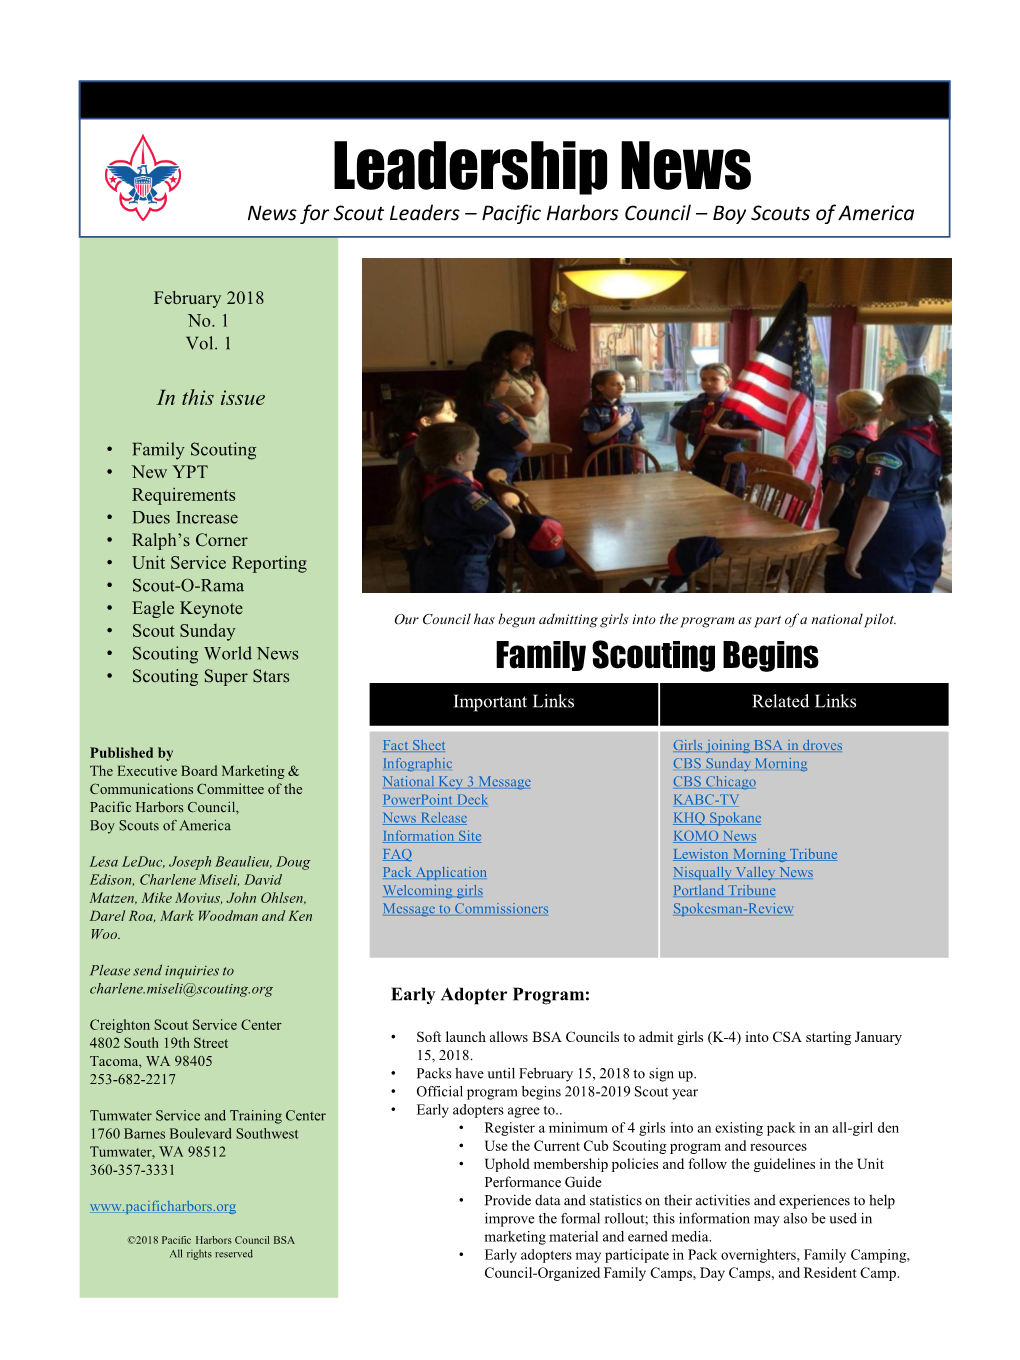 Leadership News News for Scout Leaders – Pacific Harbors Council – Boy Scouts of America